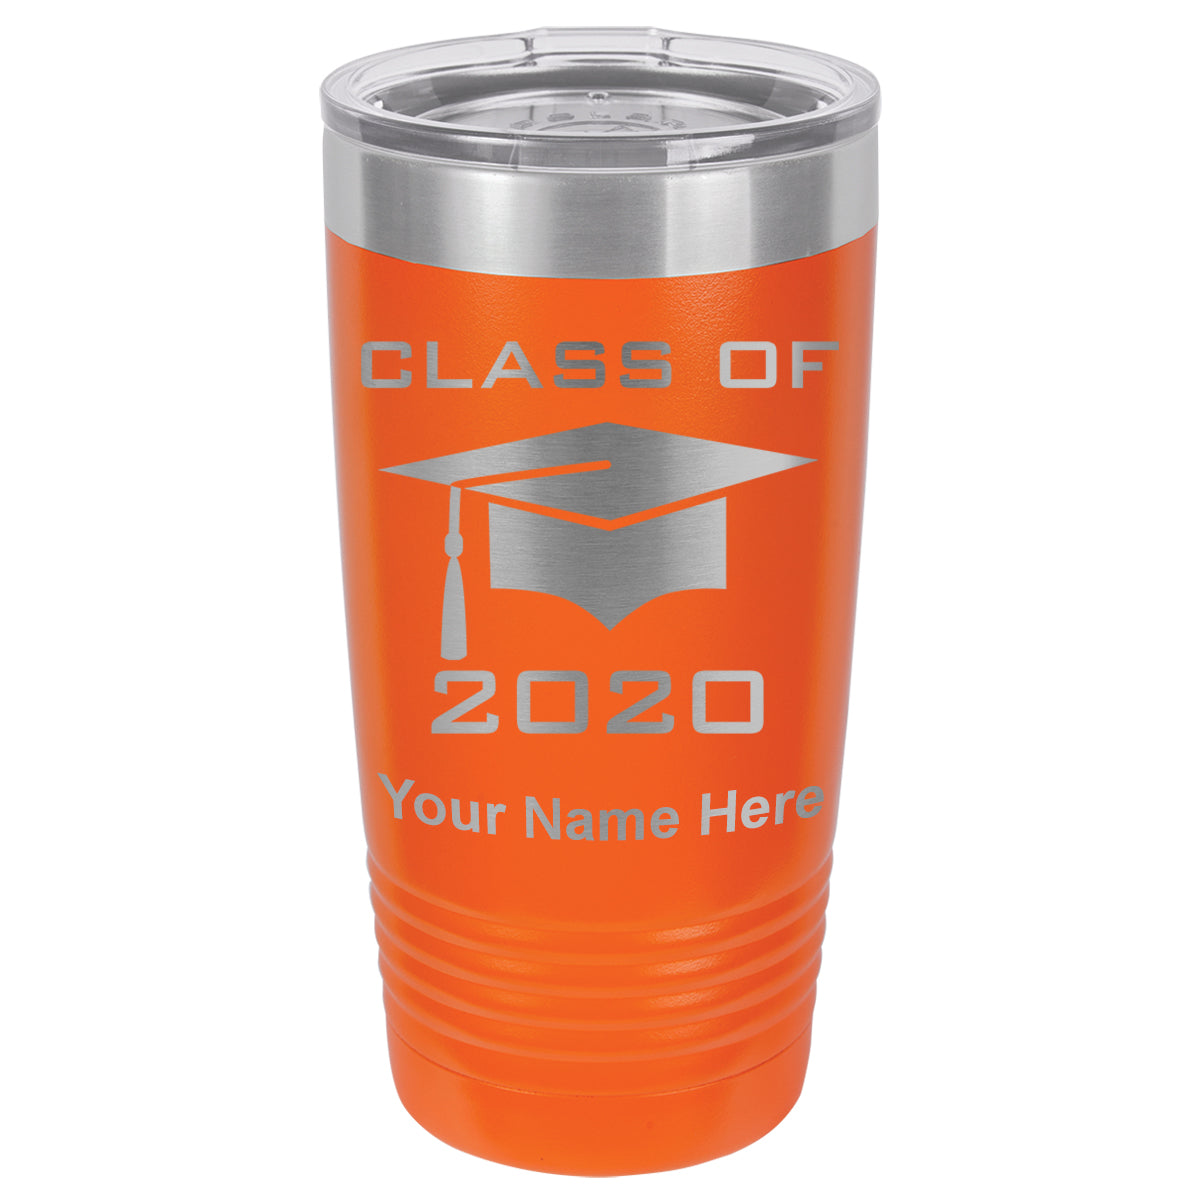 20oz Vacuum Insulated Tumbler Mug, Grad Cap Class of 2020, 2021, 2022, 2023 2024, 2025, Personalized Engraving Included